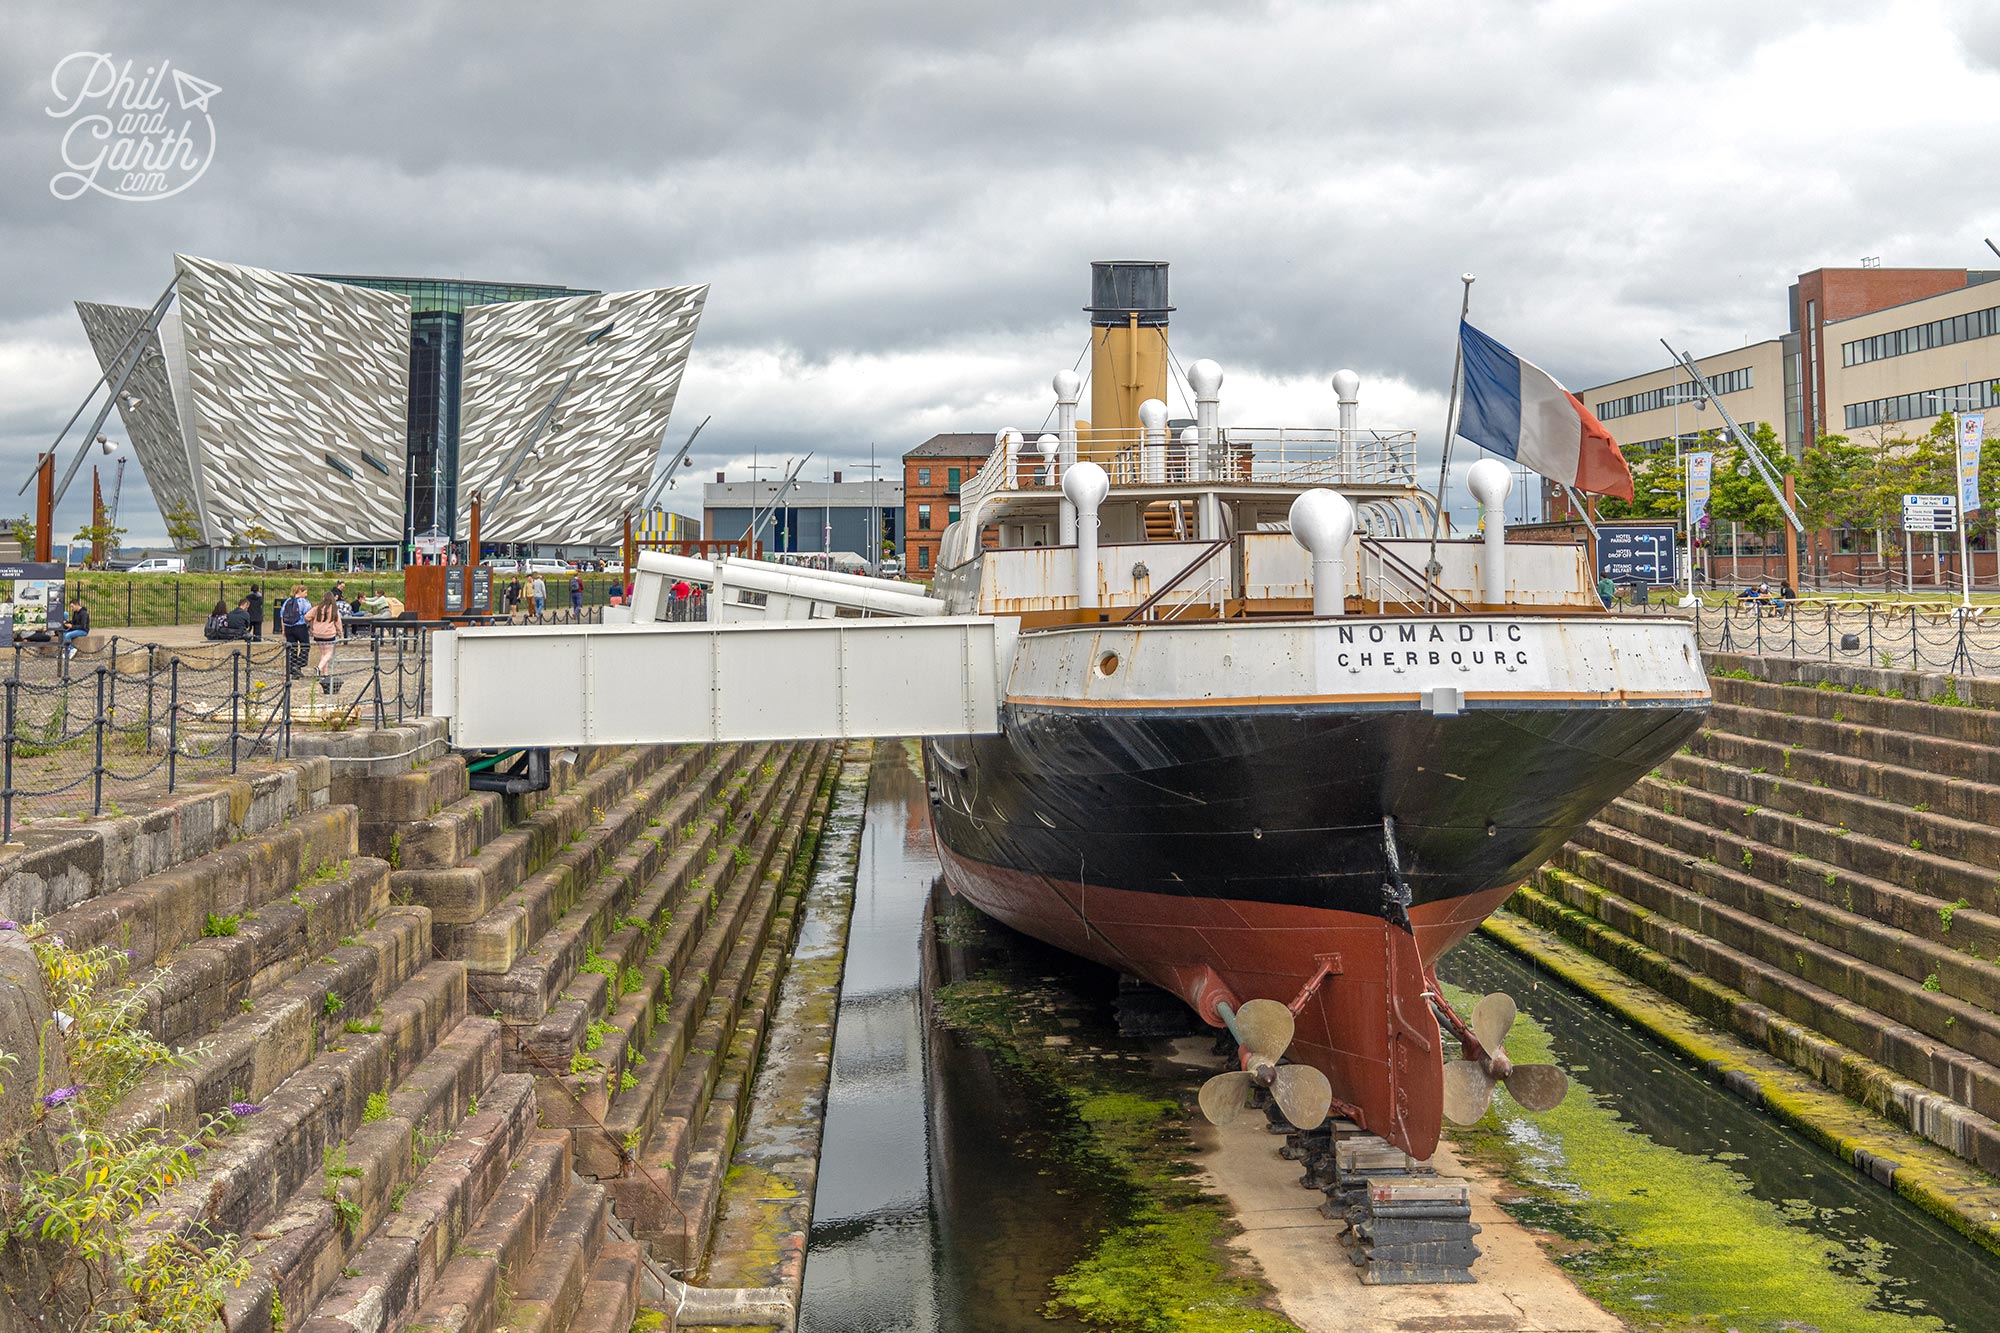 SS Nomadic was a tender ship used to ferry passengers to Titanic